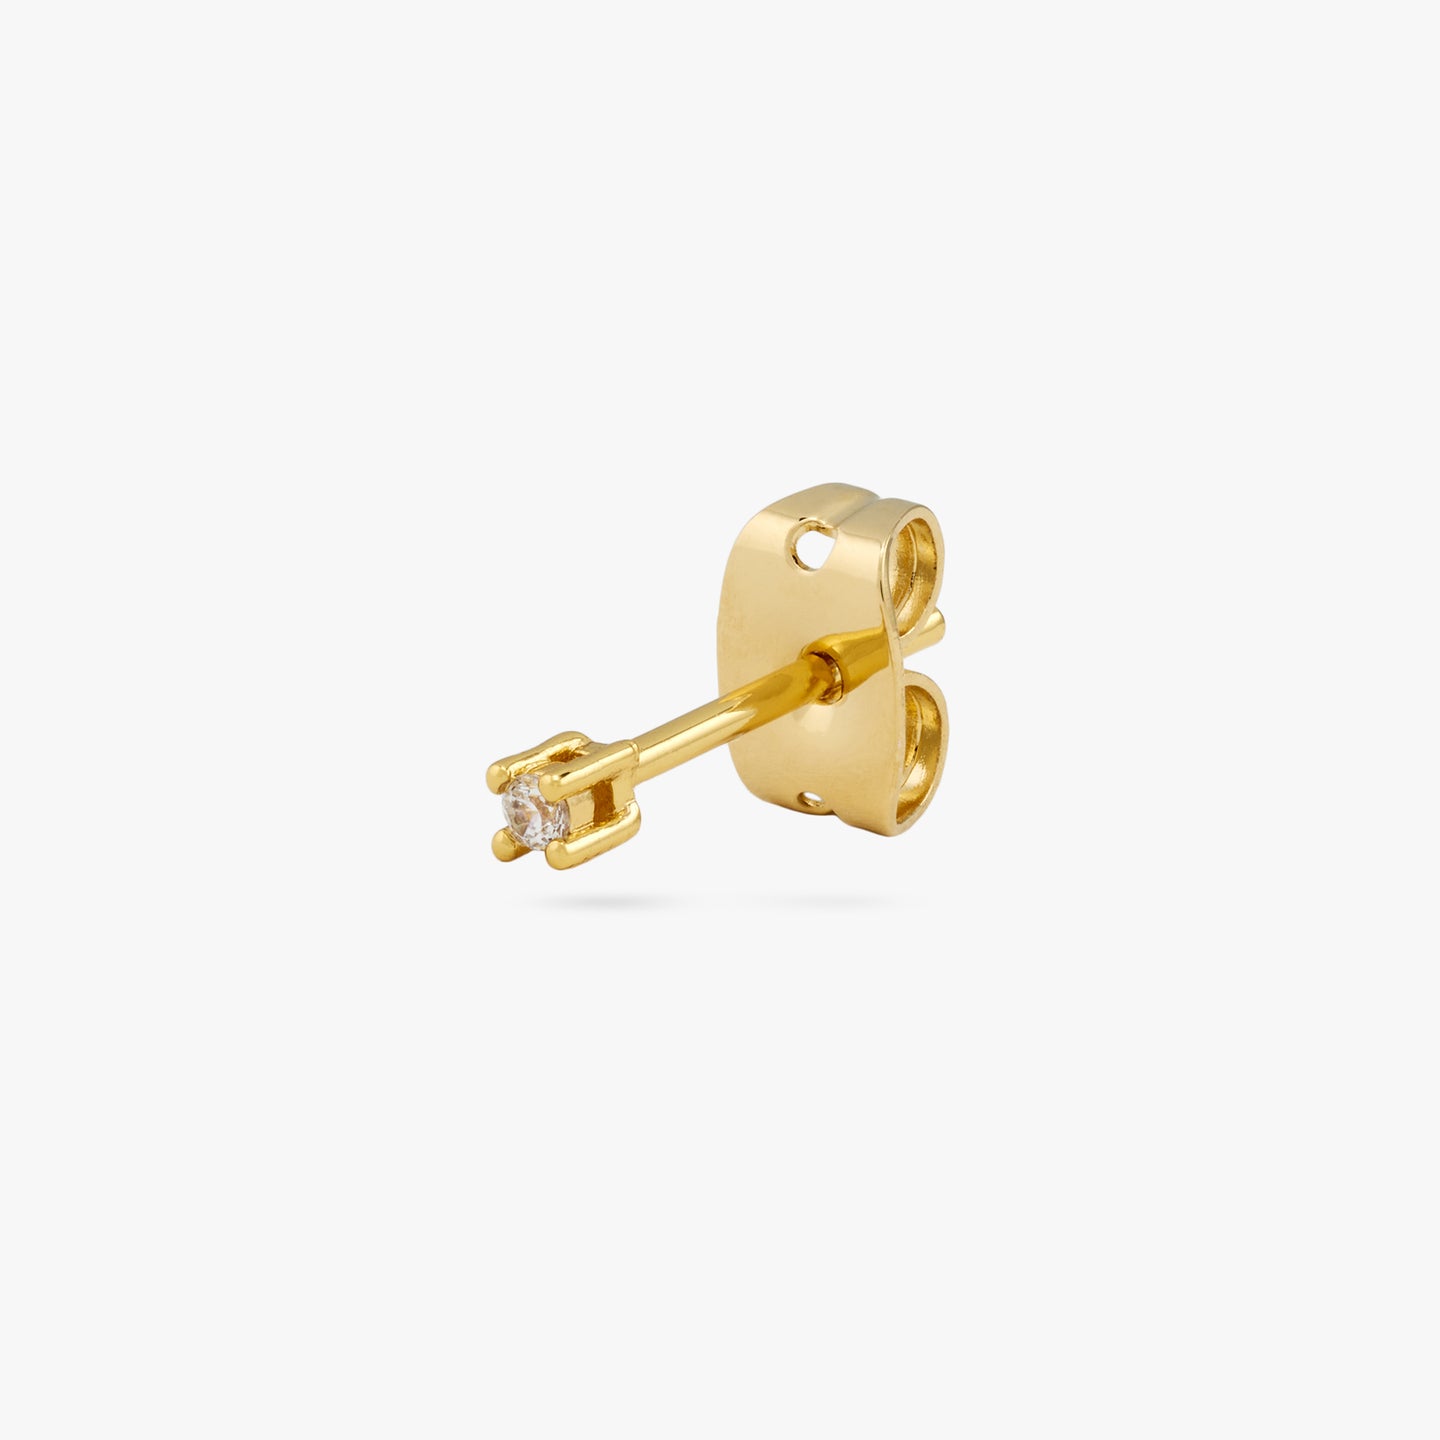 A gold micro stud with a clear cz gem color:null|gold/clear